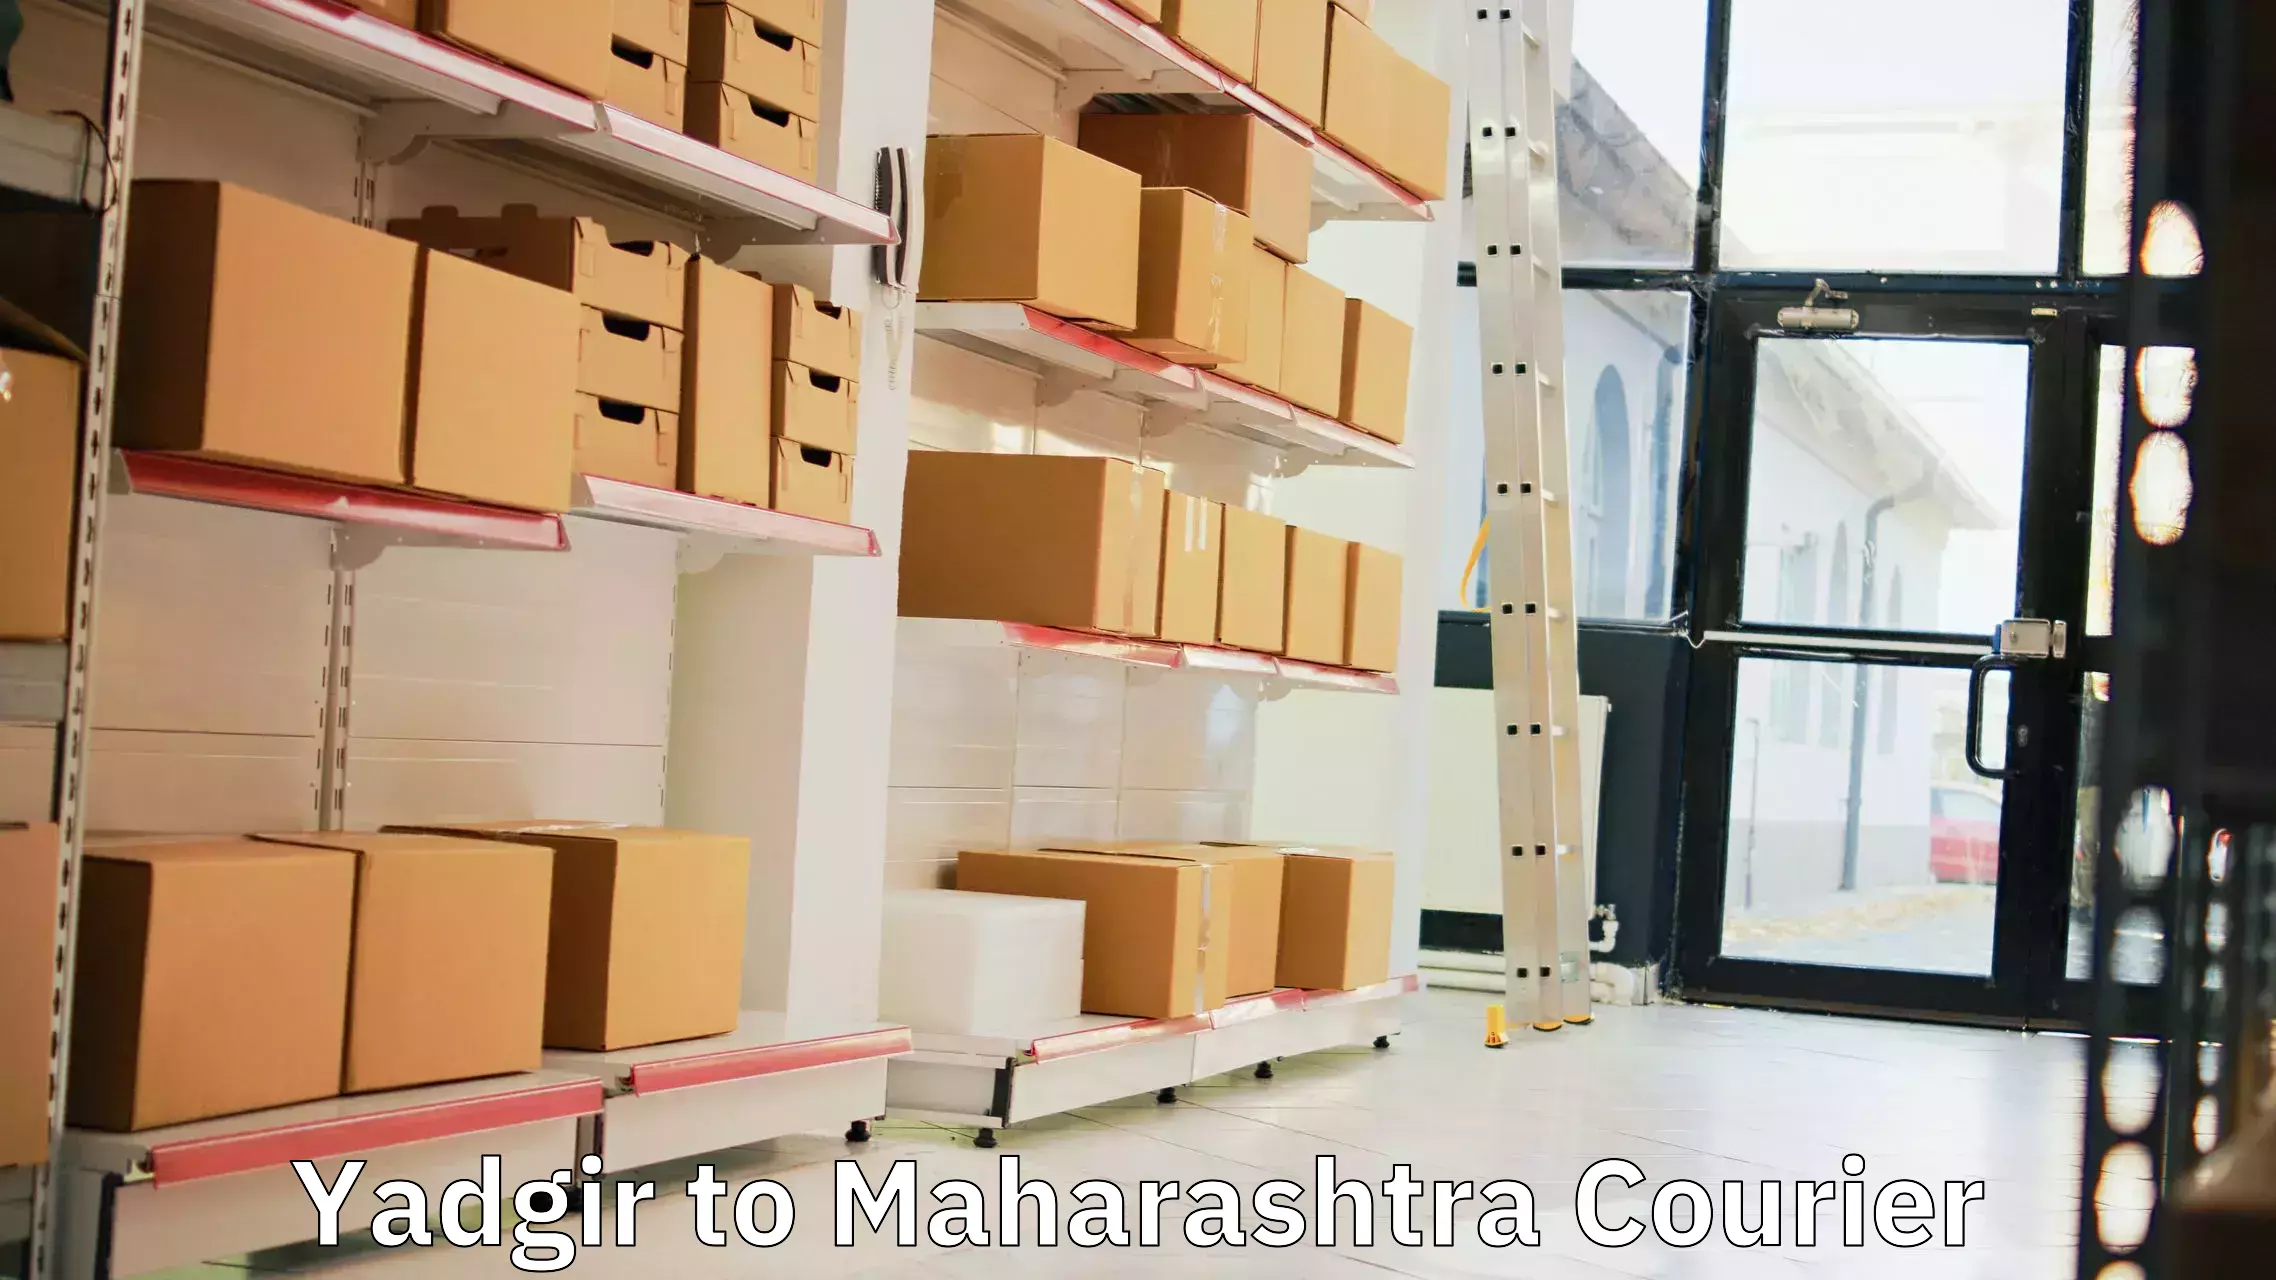 Online courier booking Yadgir to Maharashtra